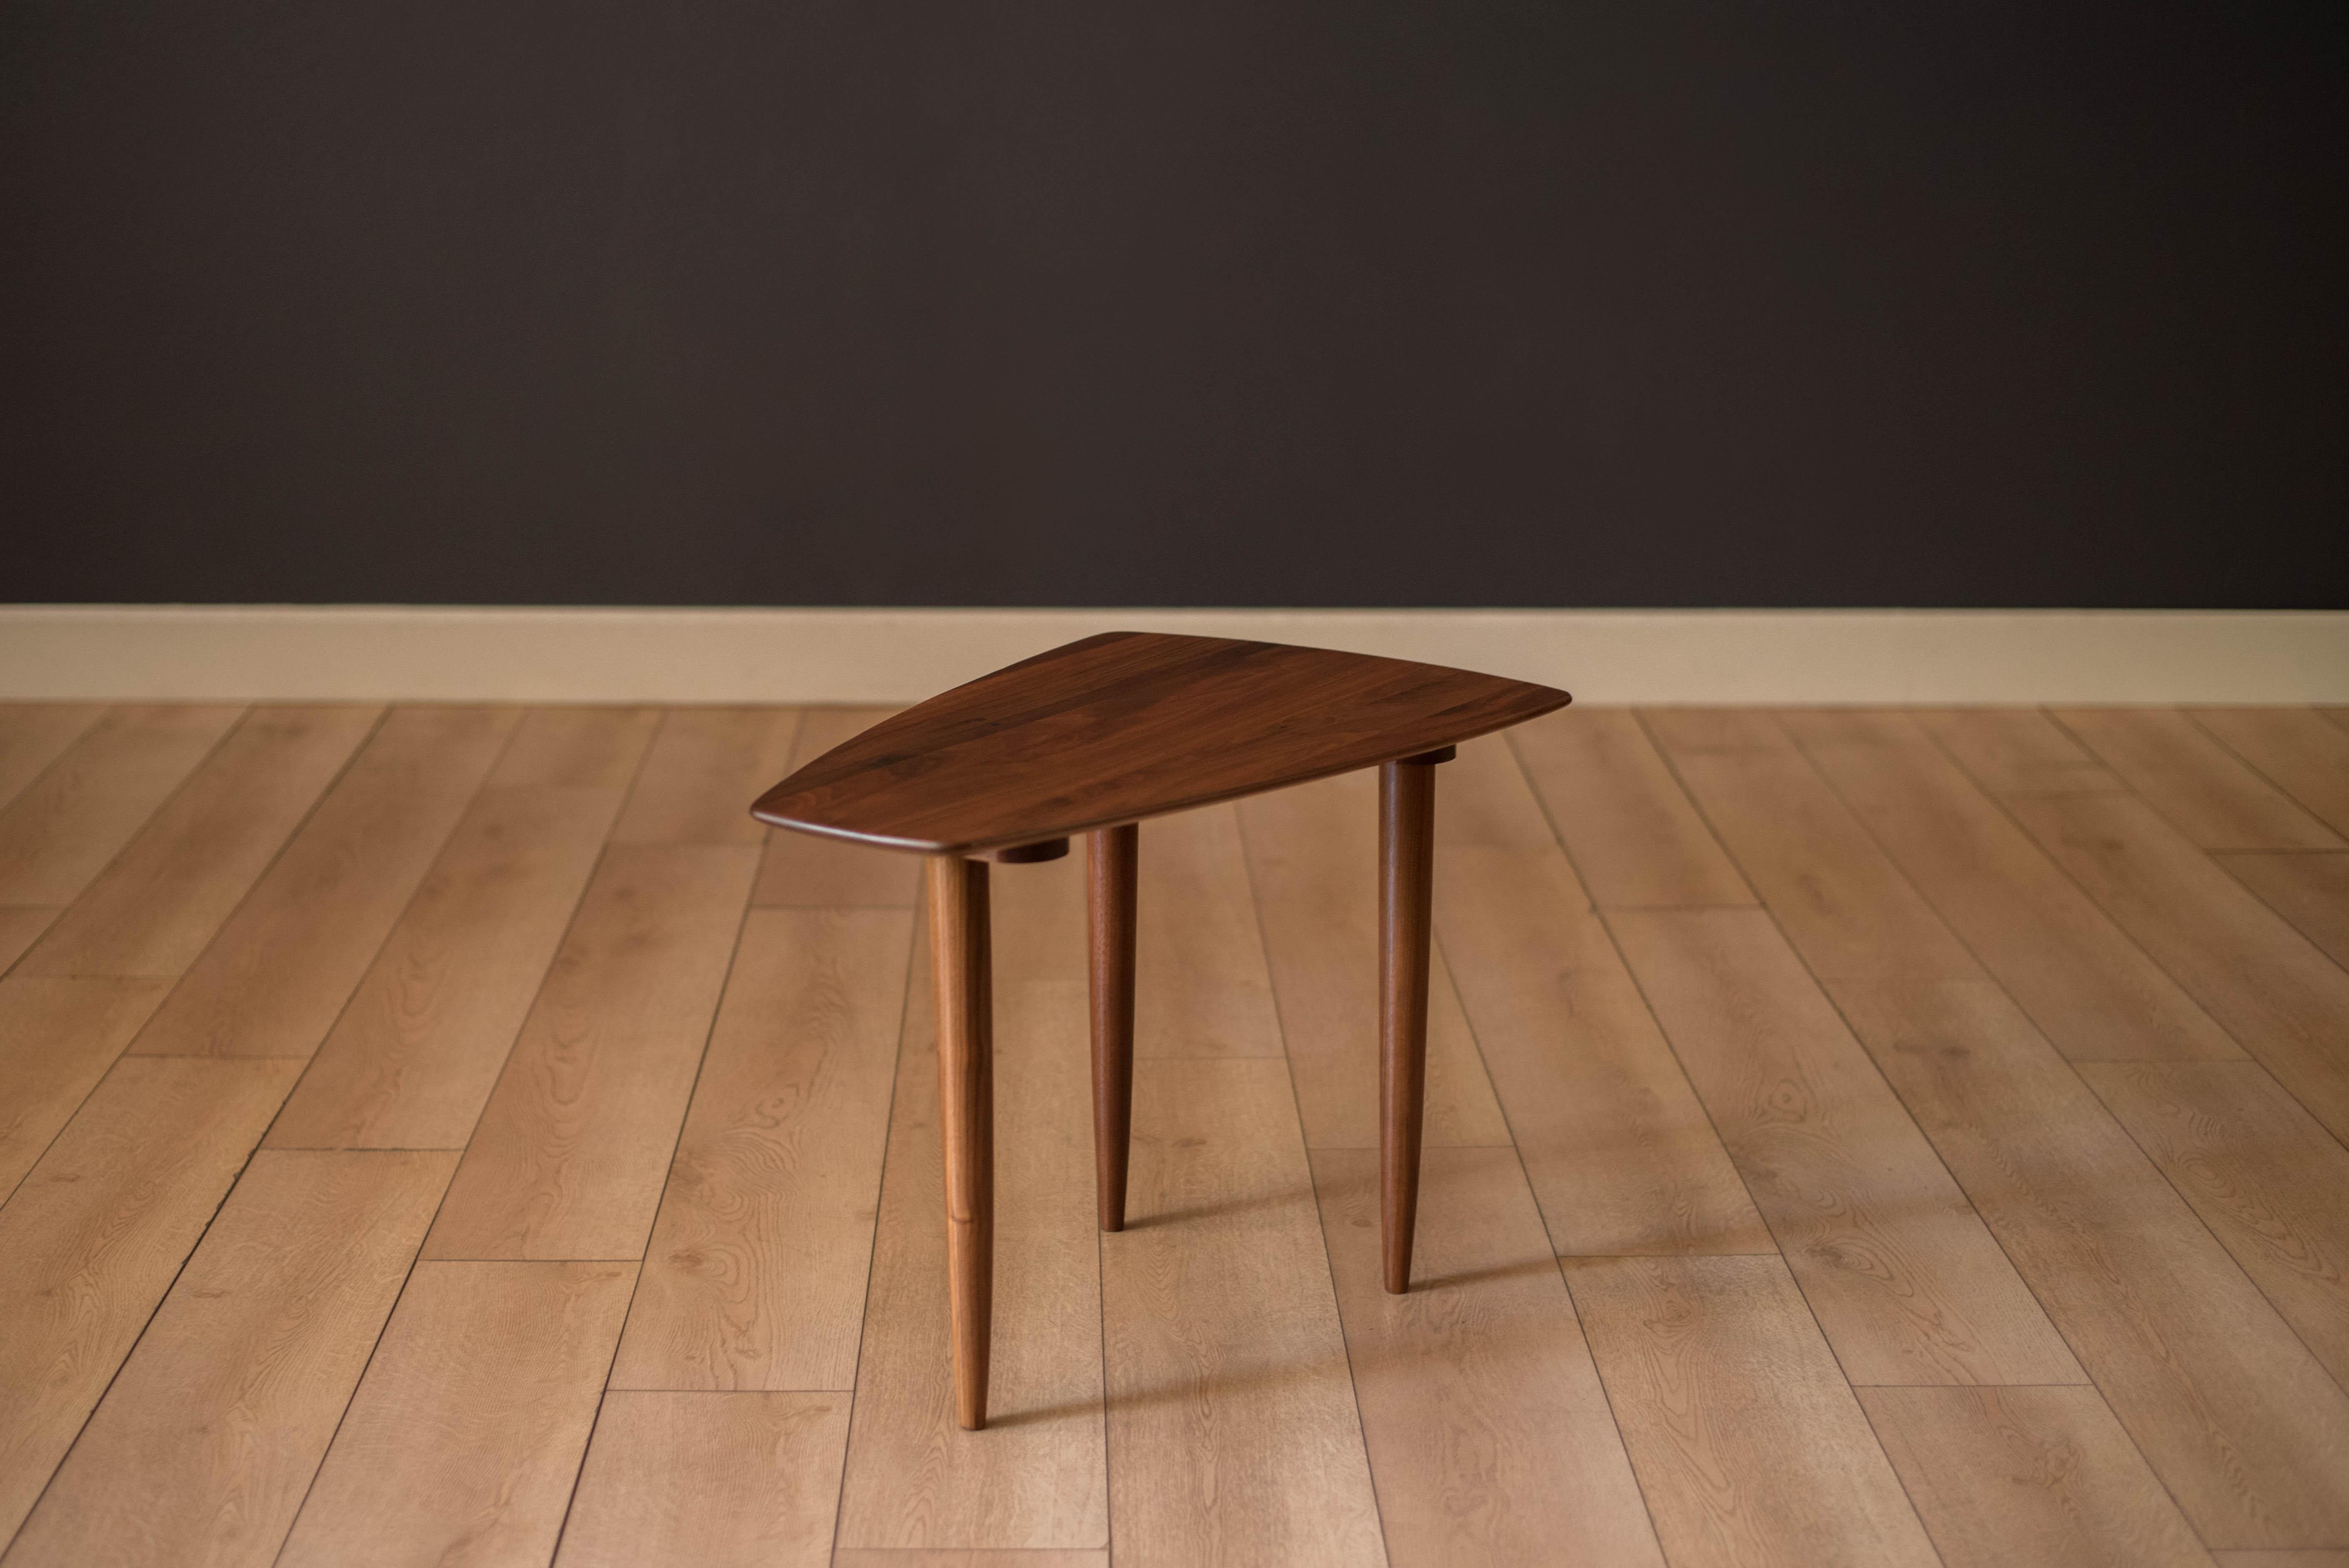 Mid century modern Prelude design end table manufactured by Ace-Hi of California, circa 1960's. This piece is crafted in solid planked walnut with a unique quadrilateral shaped table top. The perfect accent table next to a sofa sectional or reading